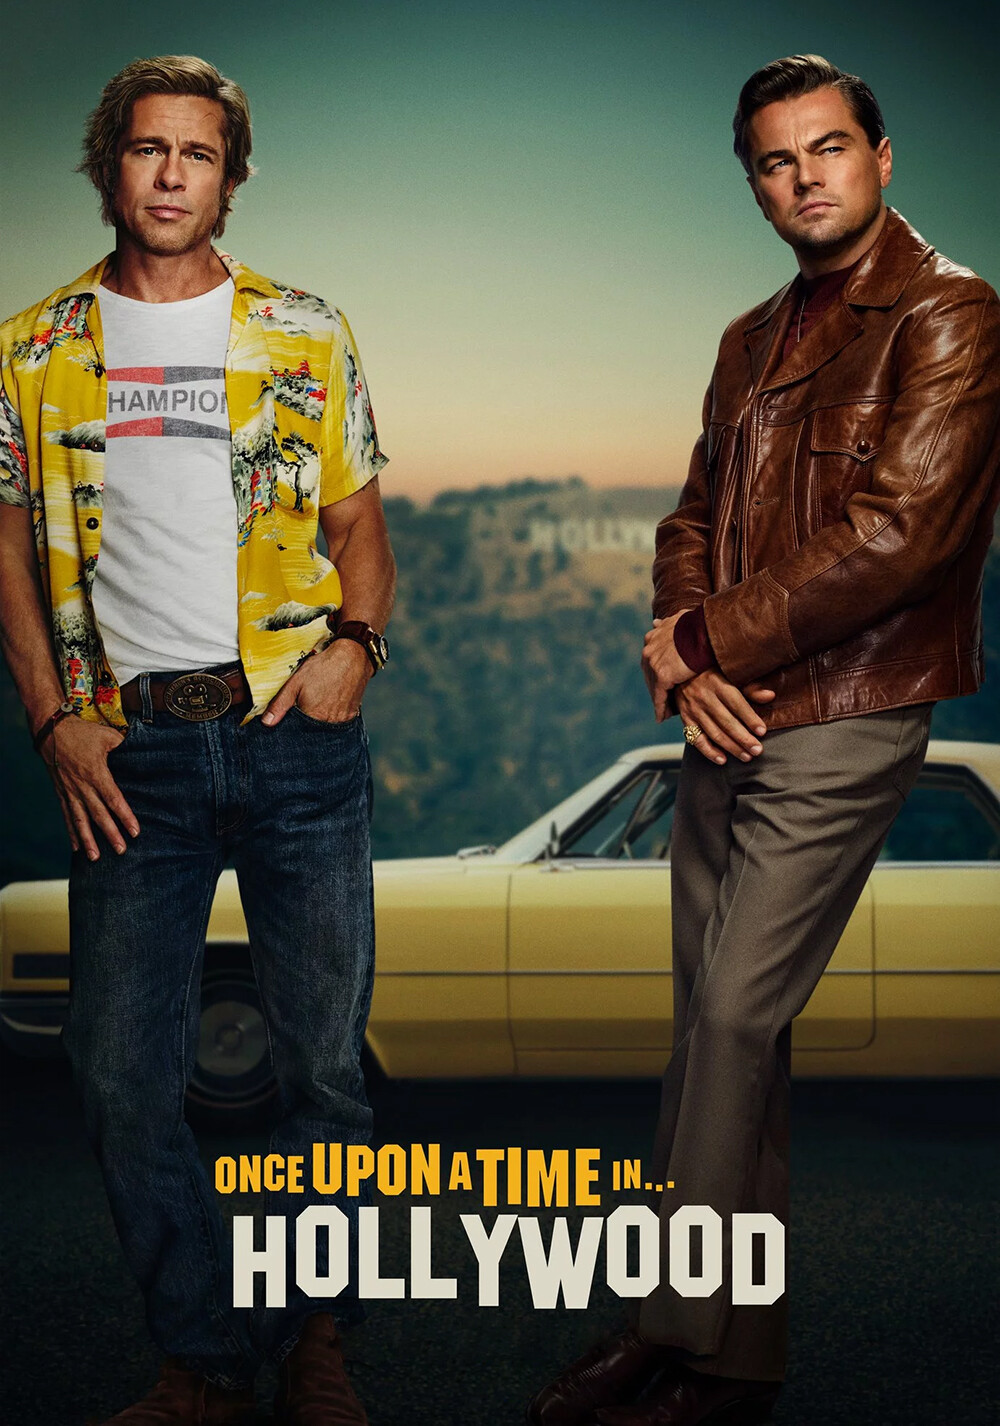 Once Upon A Time In Hollywood 2019 2160p HDR BluRayRip x265 10Bit AC3 5 1-JATT